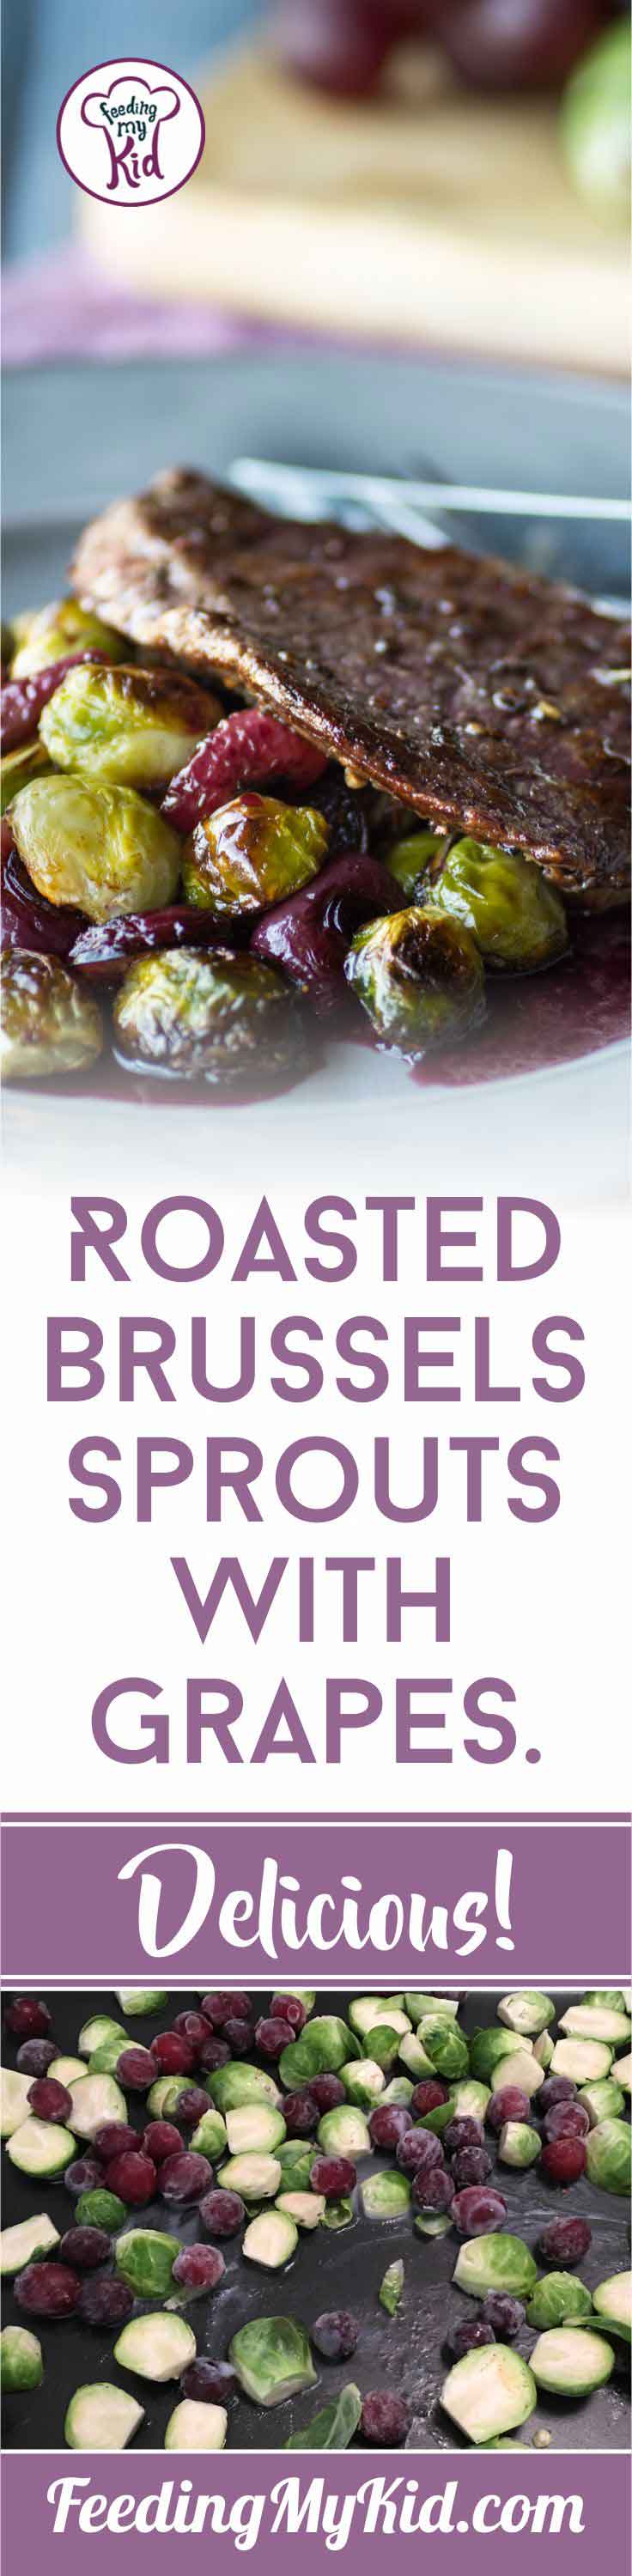 Roasting your Brussels sprouts brings out their sweet flavor! This roasted Brussels sprouts recipe is a delicious combination and it's so easy to prepare.